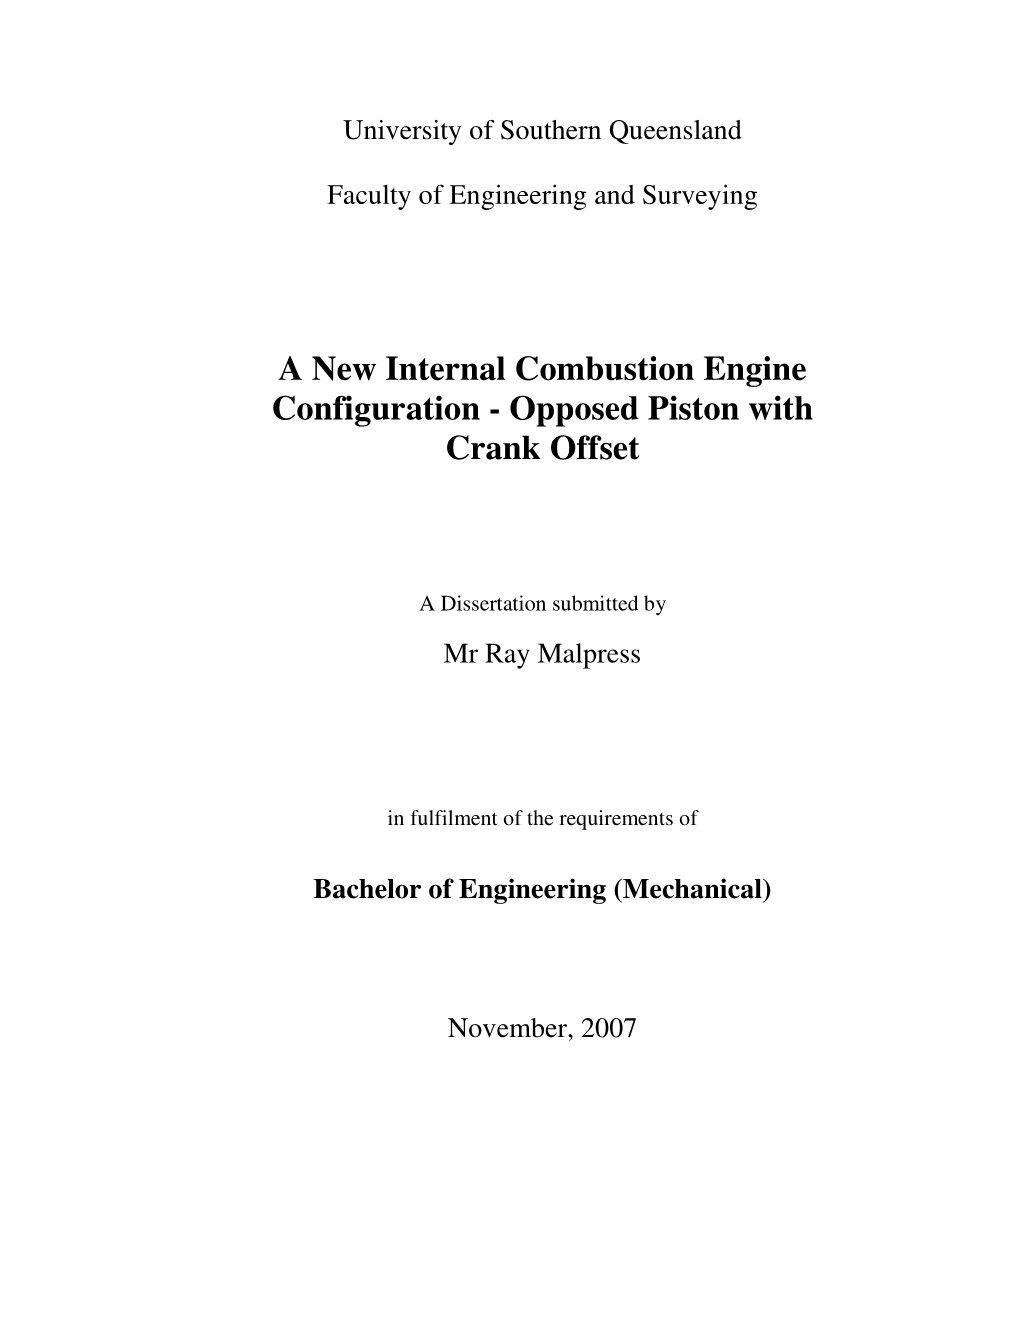 A New Internal Combustion Engine Configuration - Opposed Piston with Crank Offset